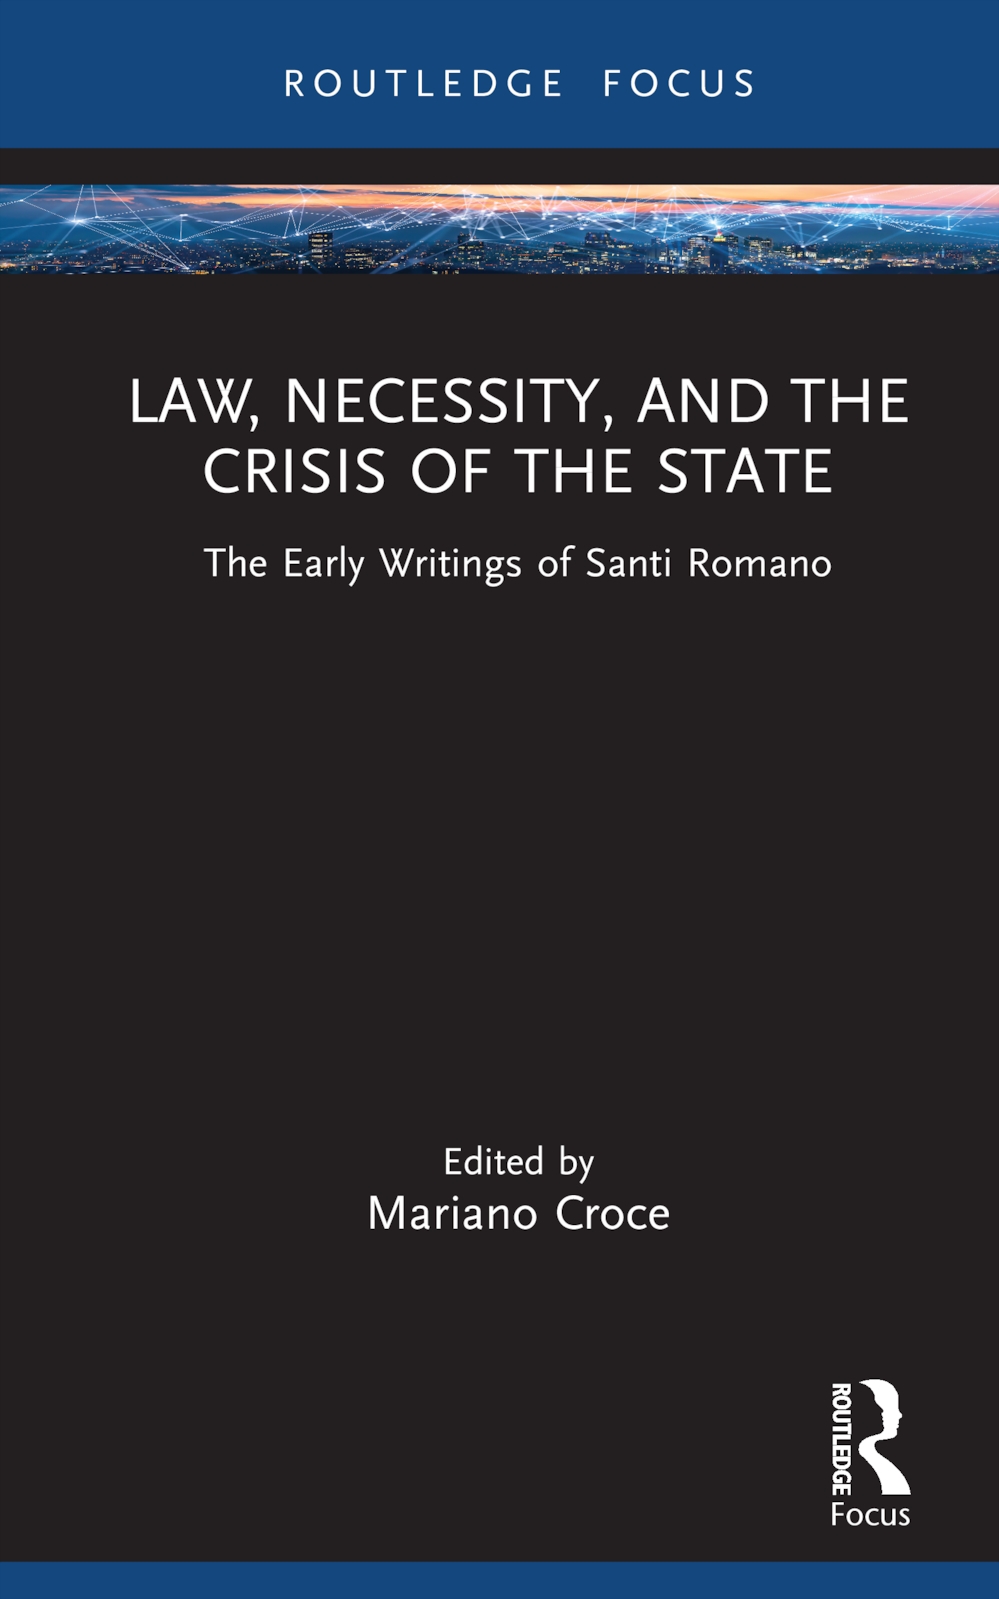 Law, Necessity and the Crisis of the State: The Early Writings of Santi Romano